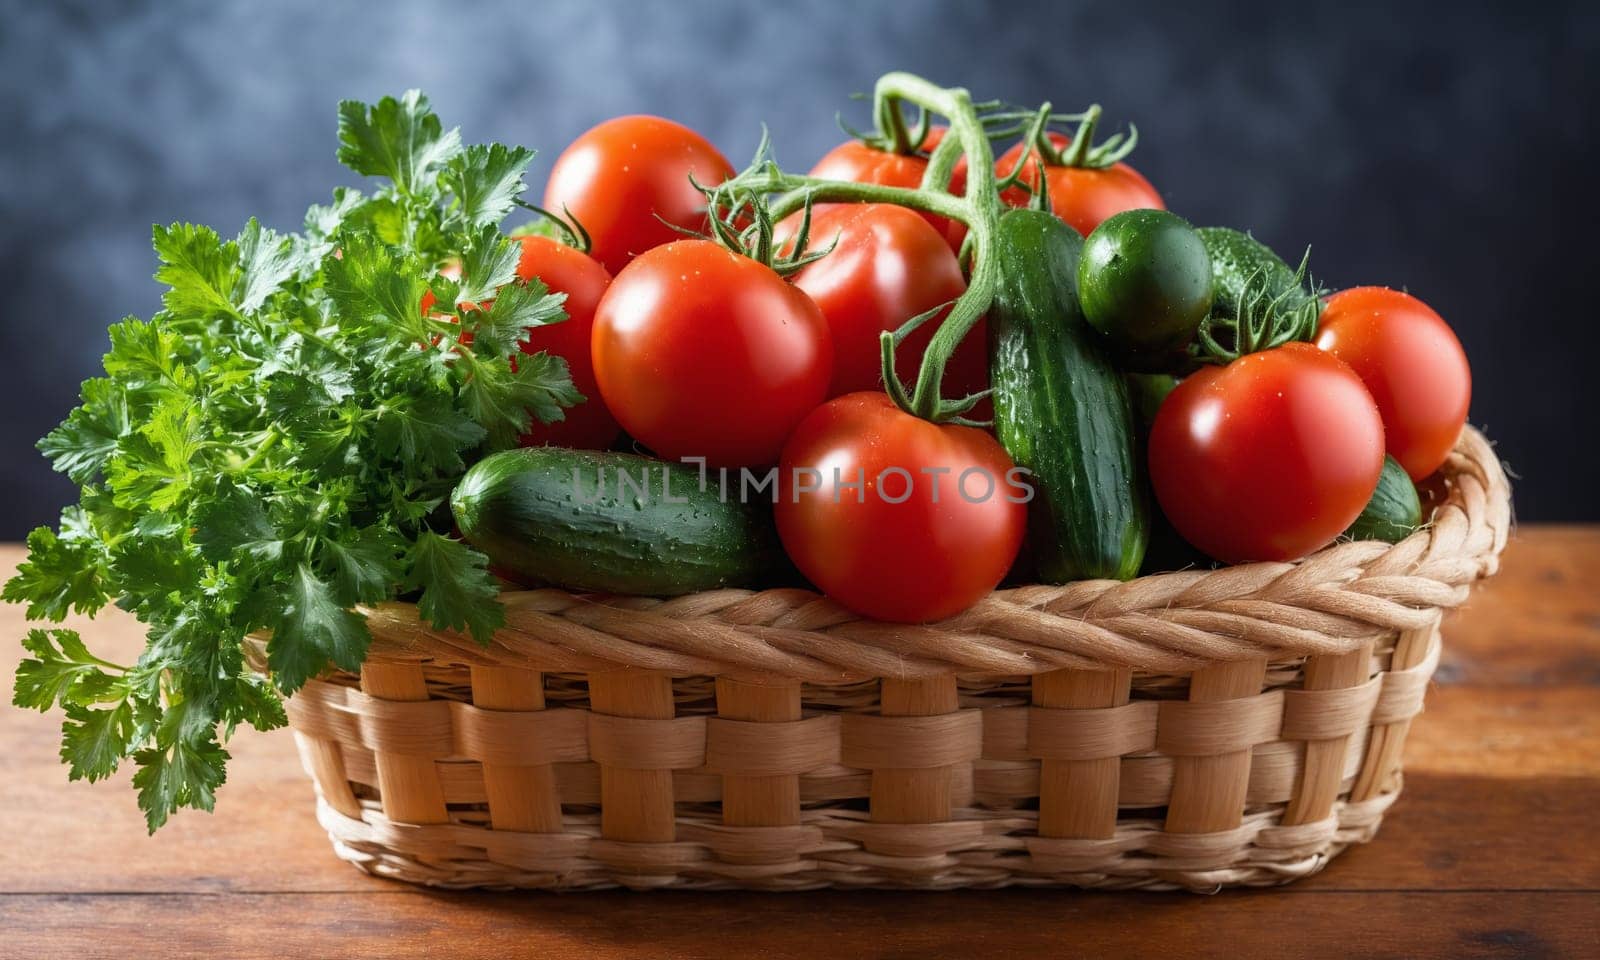 Cucumbers, tomatoes and parsley in a basket on a wooden table.